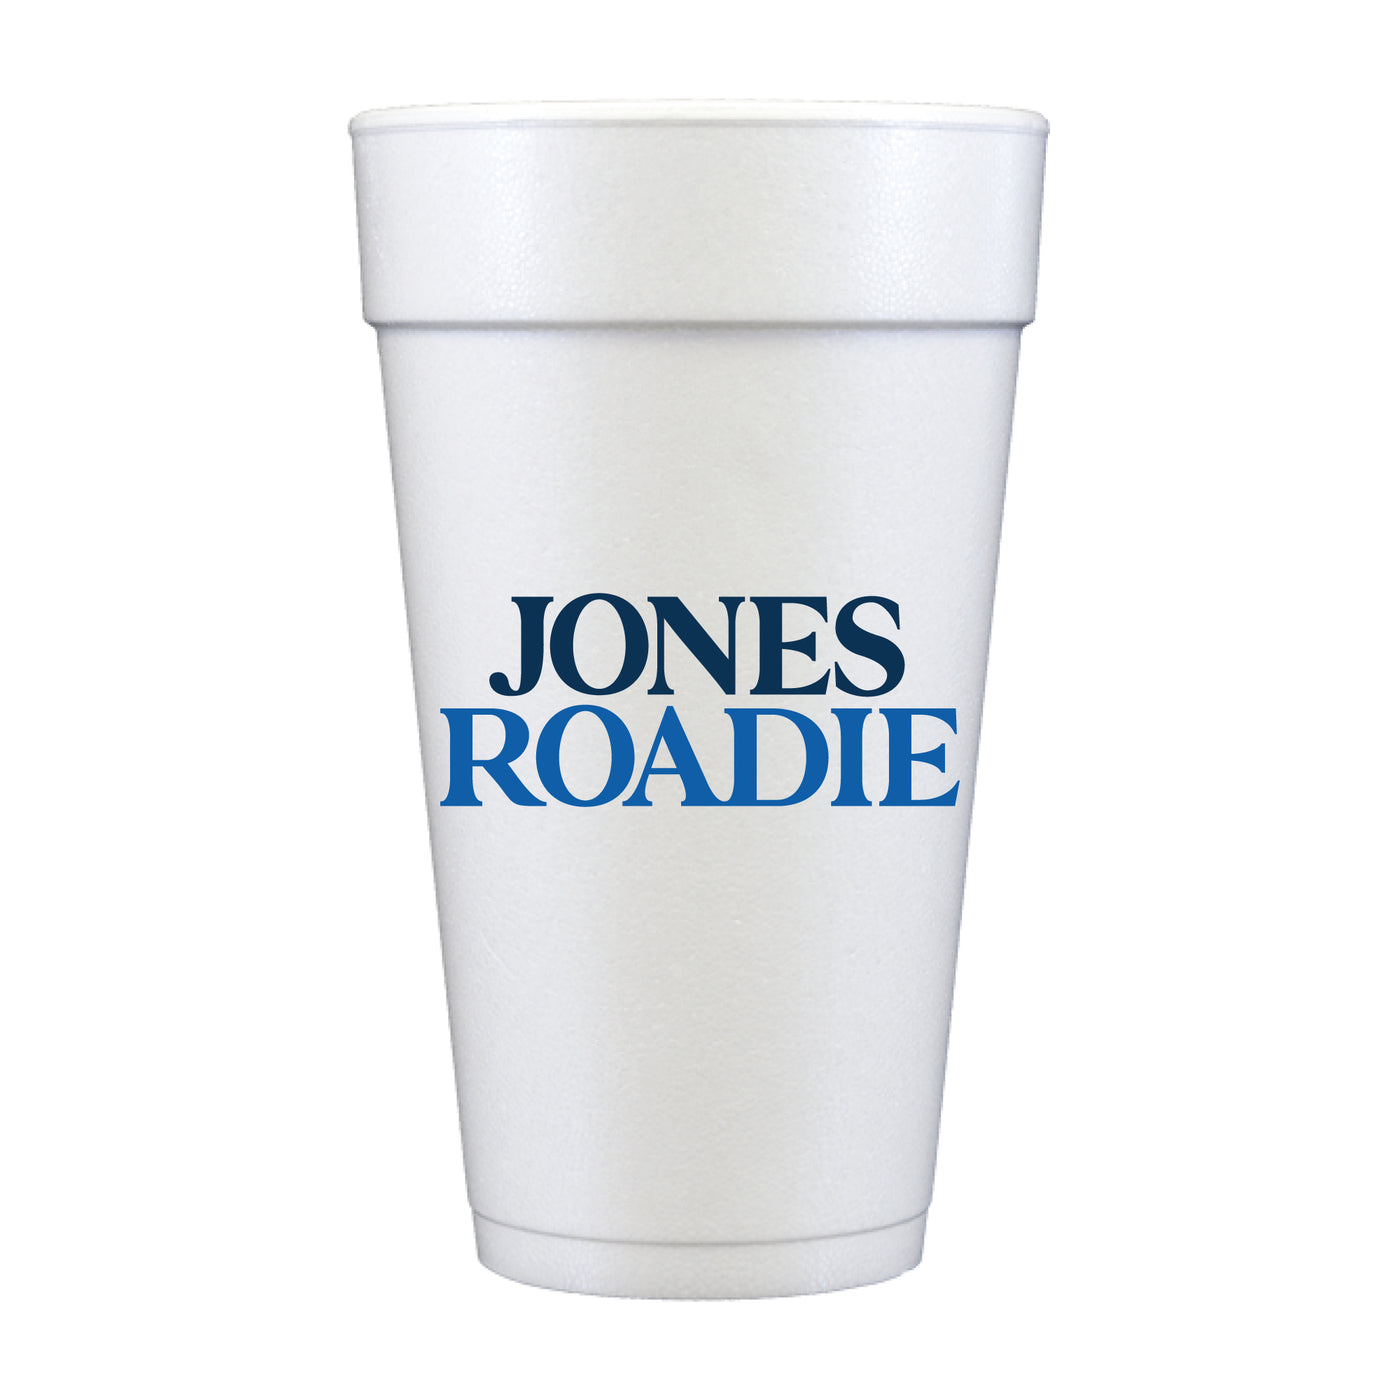 At Home Collection | Custom Last Name Roadie Foam Cups